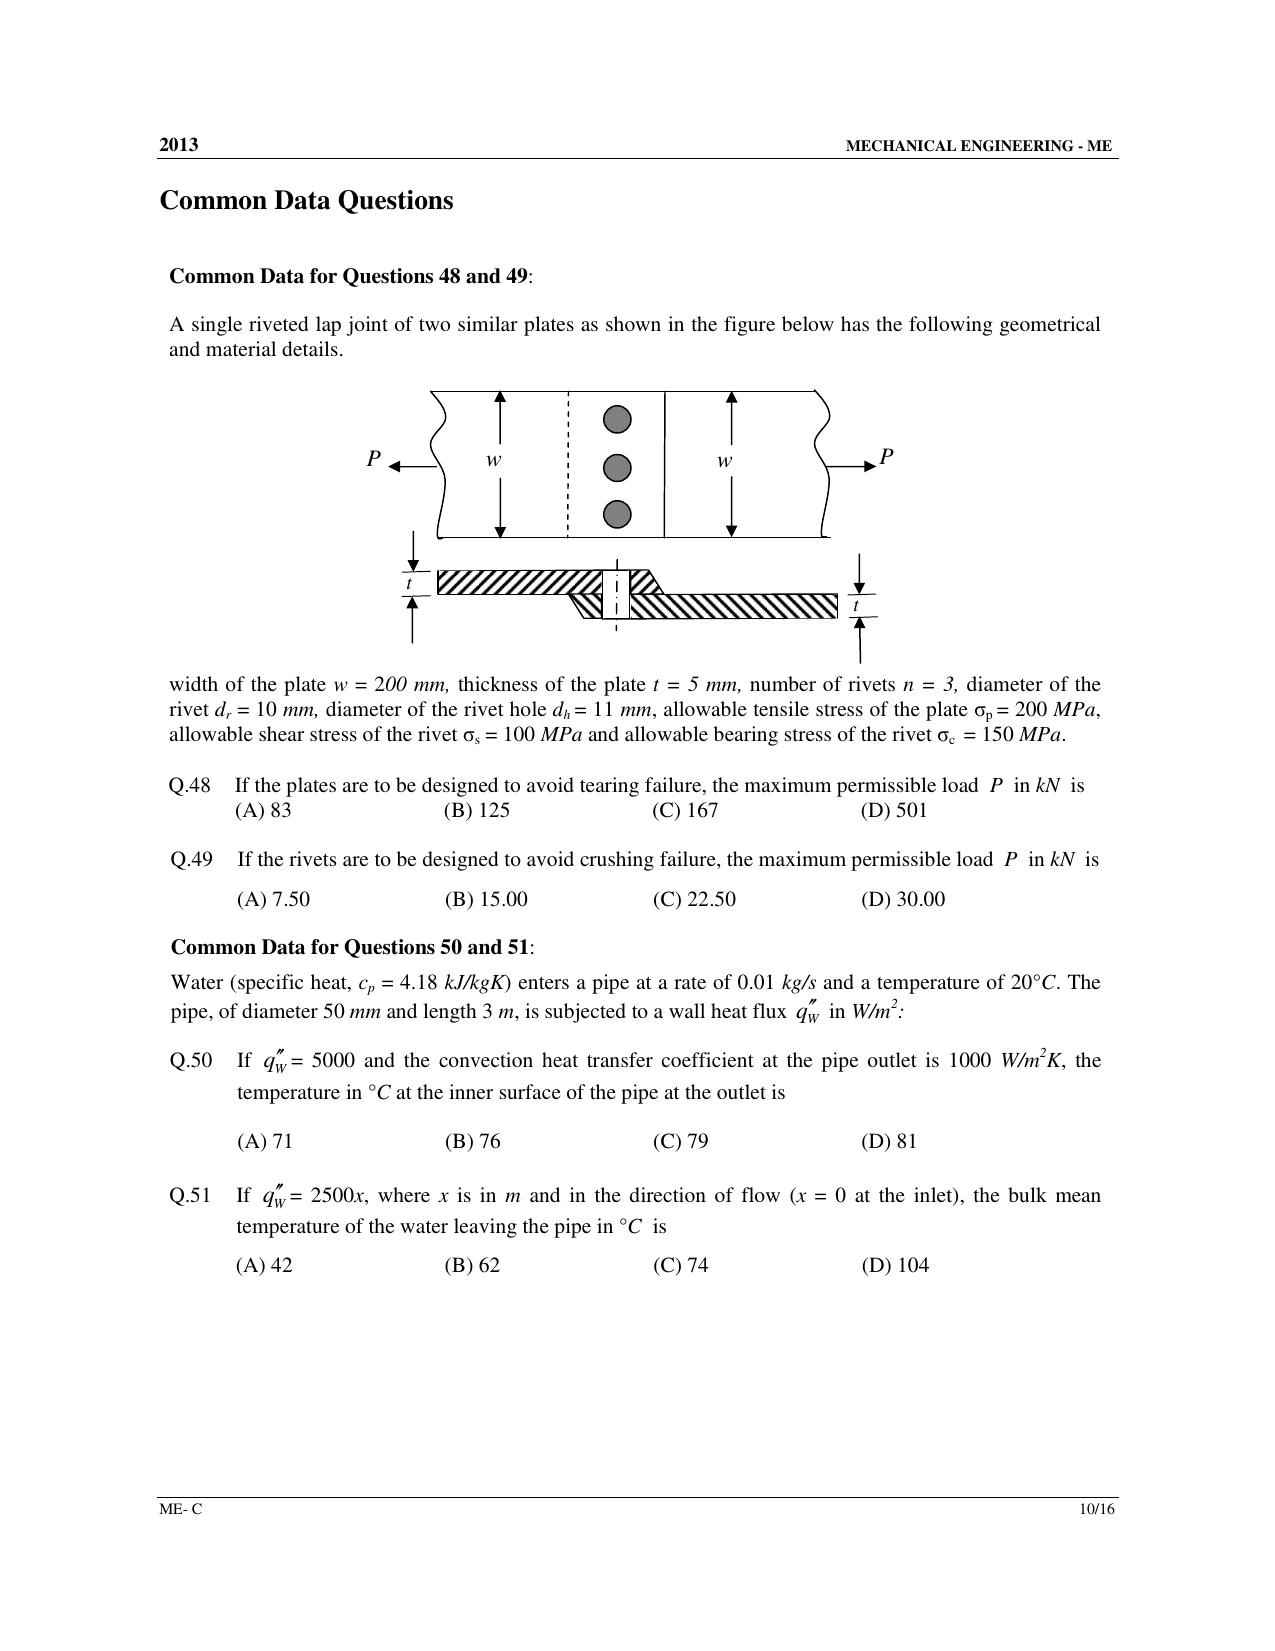 GATE 2013 Mechanical Engineering (ME) Question Paper with Answer Key - Page 39